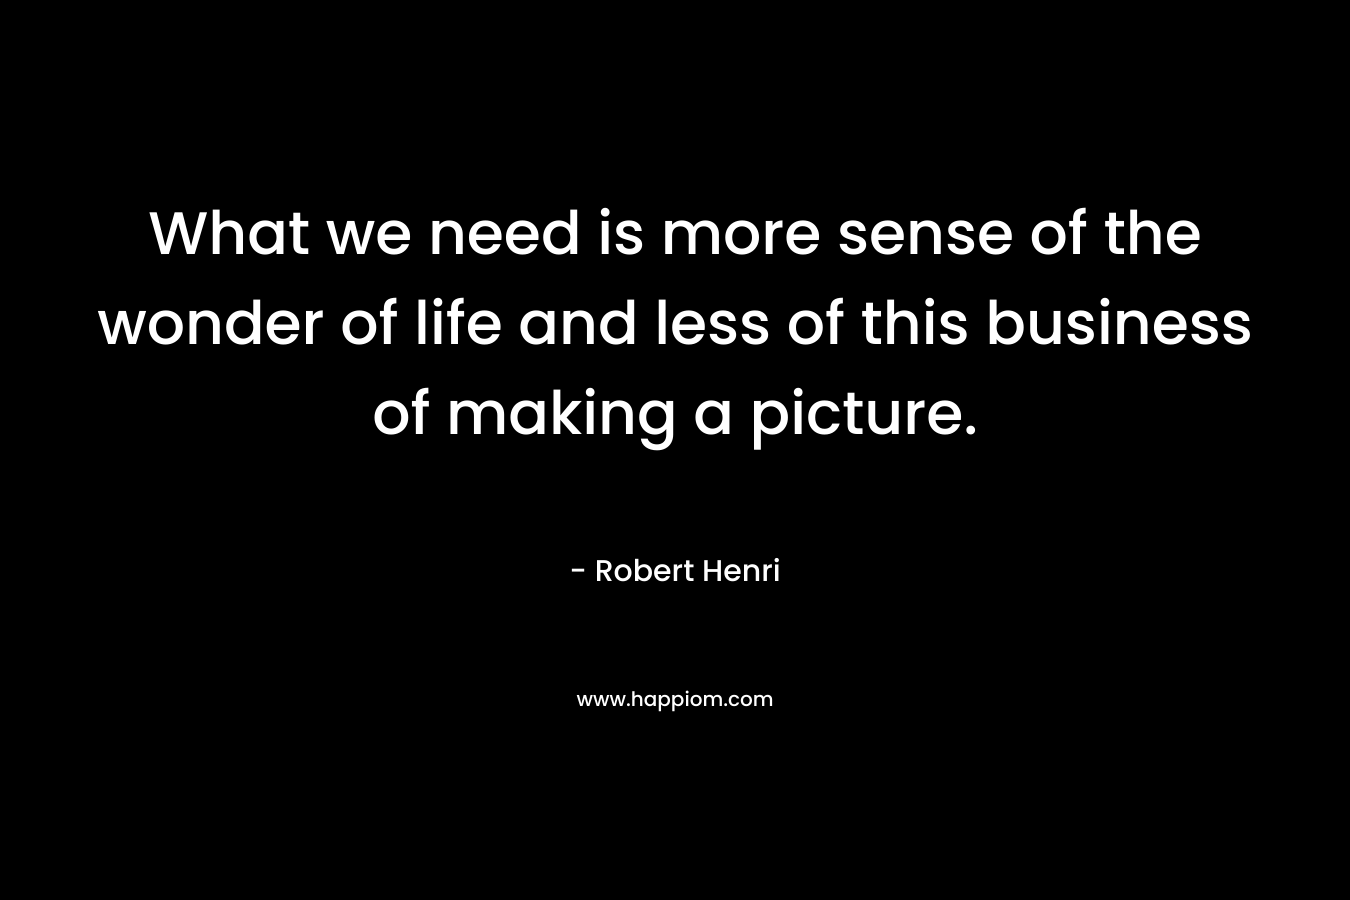 What we need is more sense of the wonder of life and less of this business of making a picture. – Robert Henri